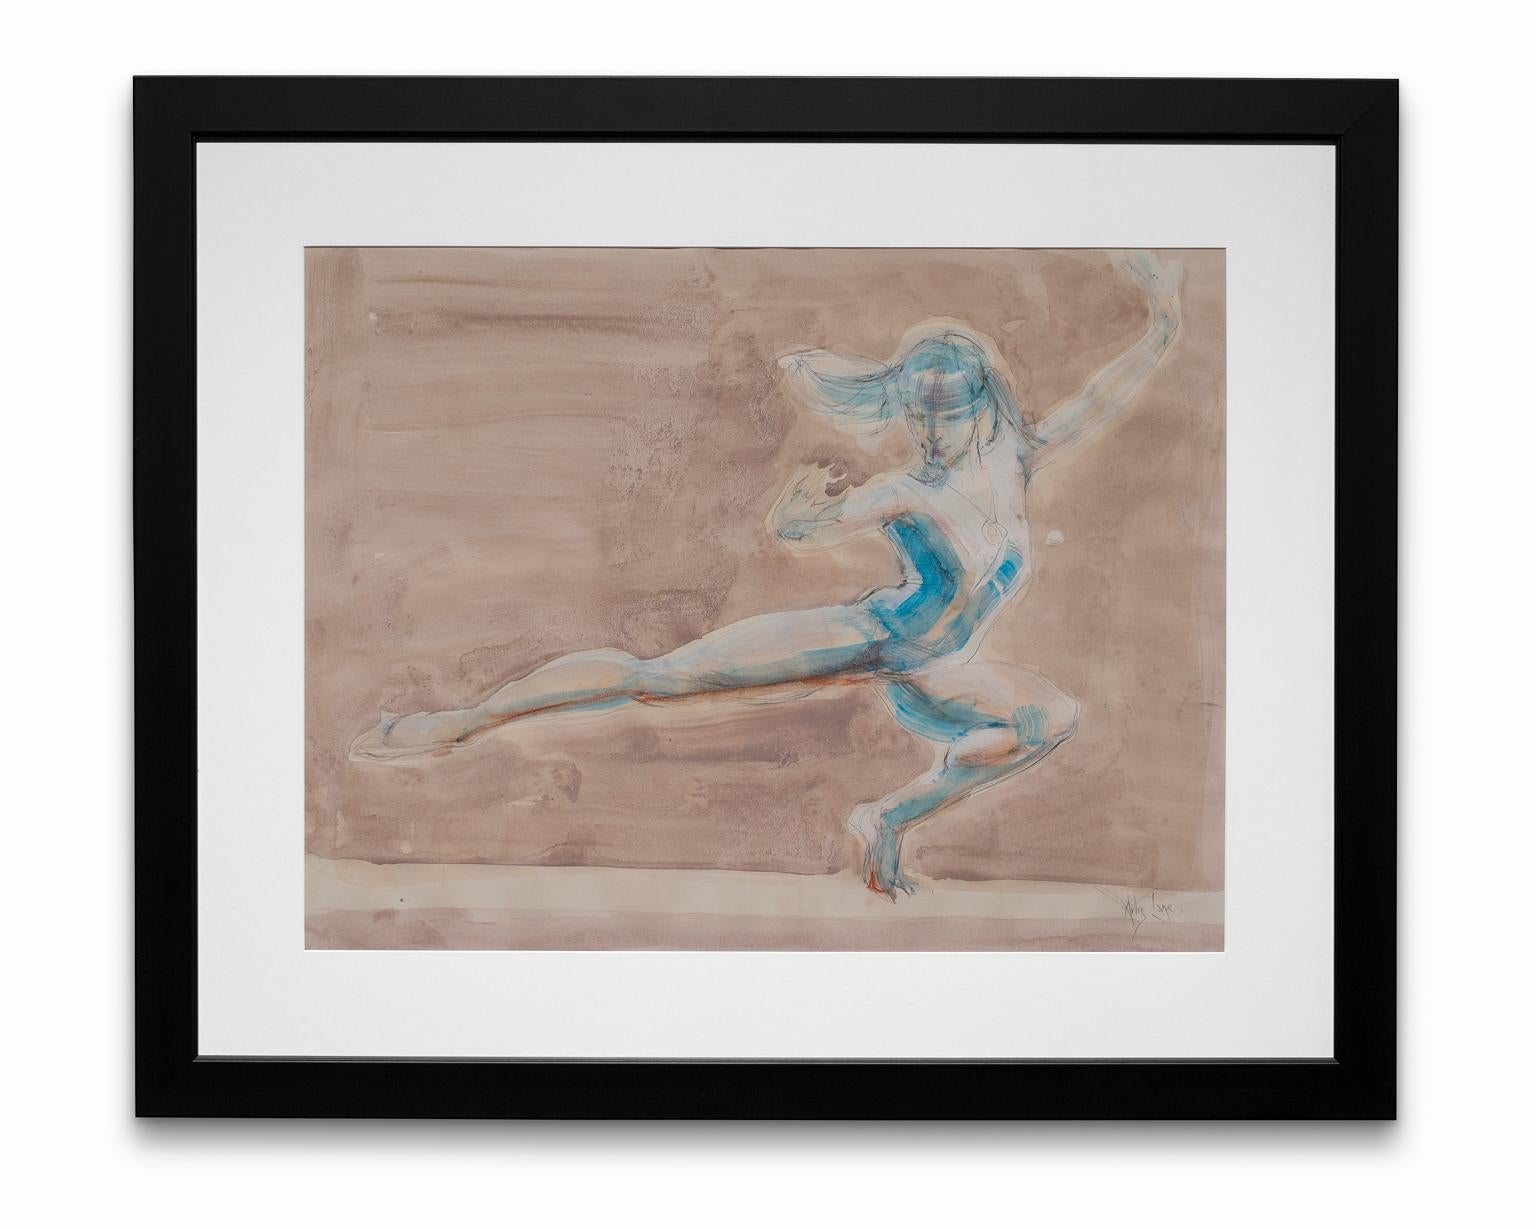 Artis Lane Nude Painting - "Dance", Acrylic and Graphite on Paper